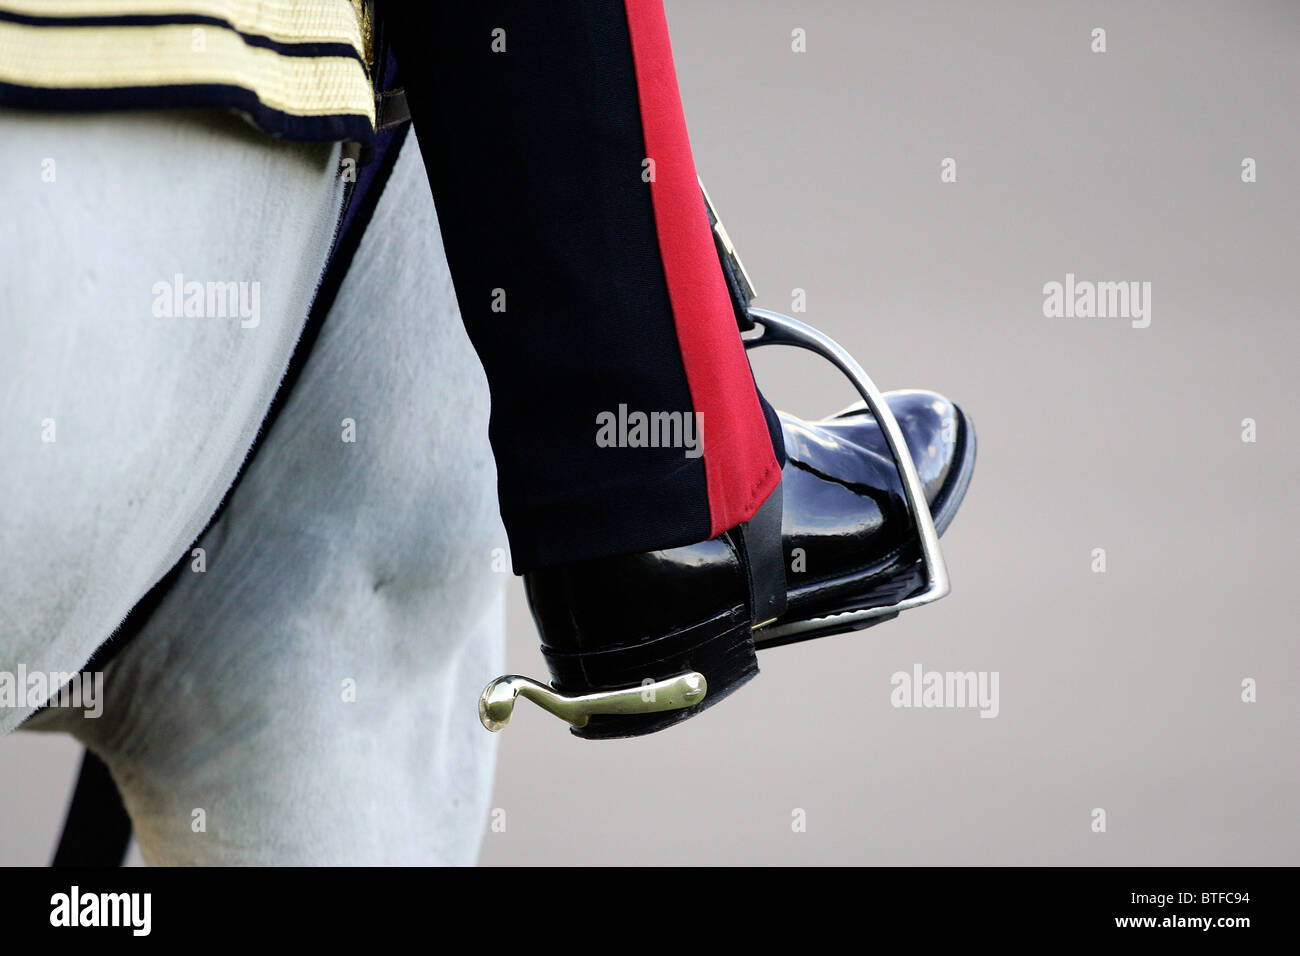 Colonel's foot with spurs in stirrup during a Passing Out Parade at Sandhurst Military Academy in Surrey, UK Stock Photo